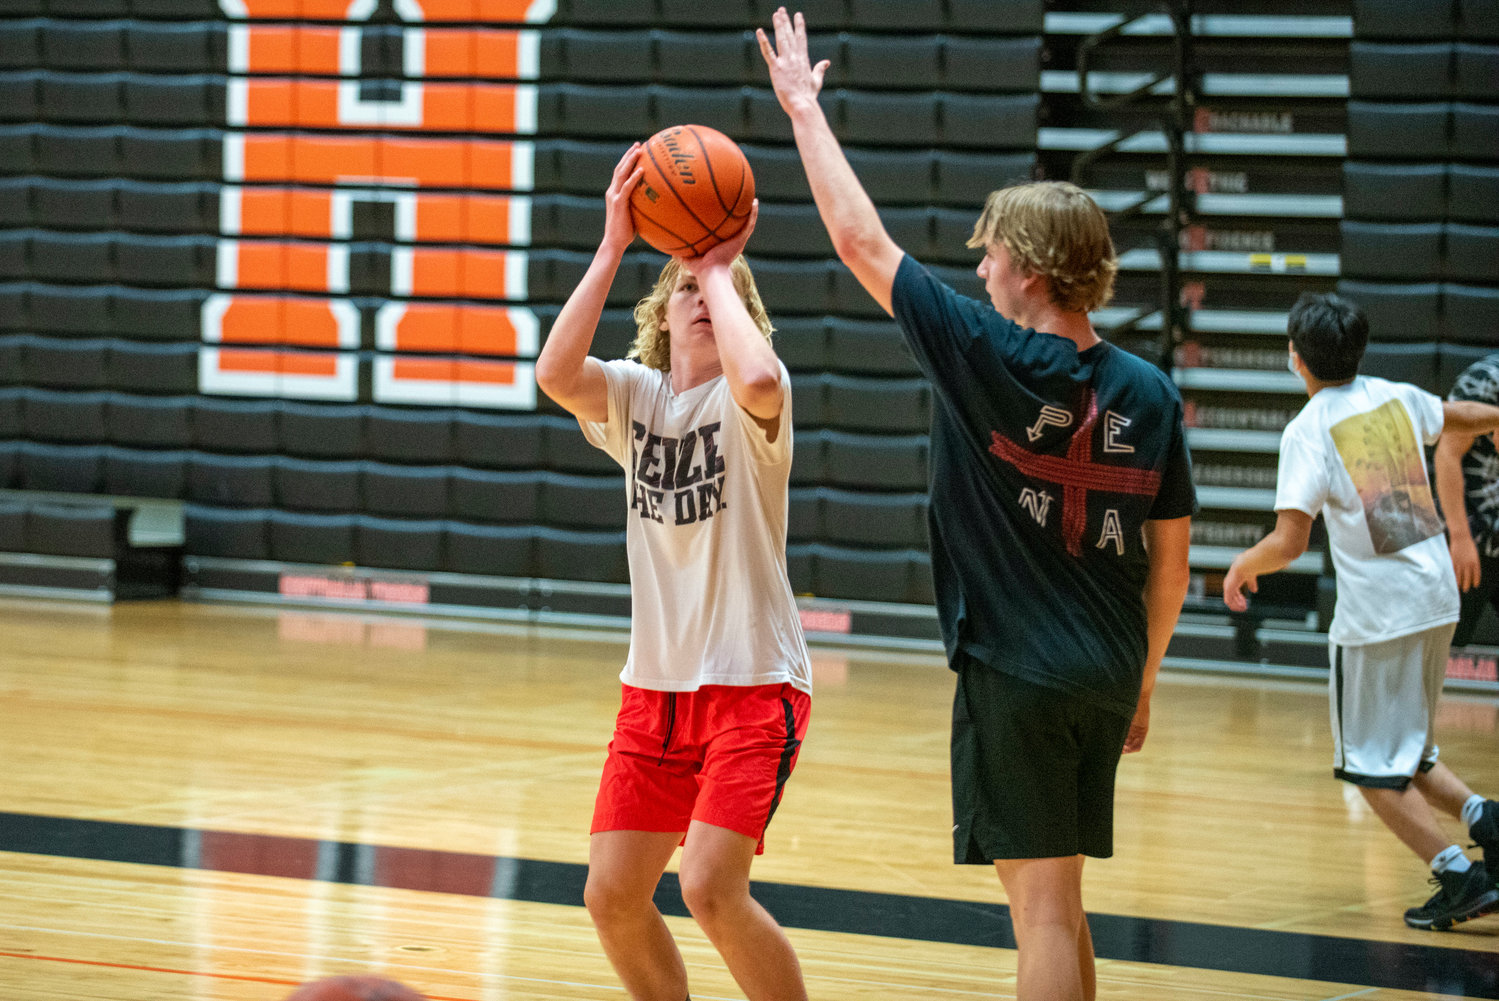 Centralia's Von Wasson lines up a shot while Cohen Ballard puts a hand up during practice Tuesday.